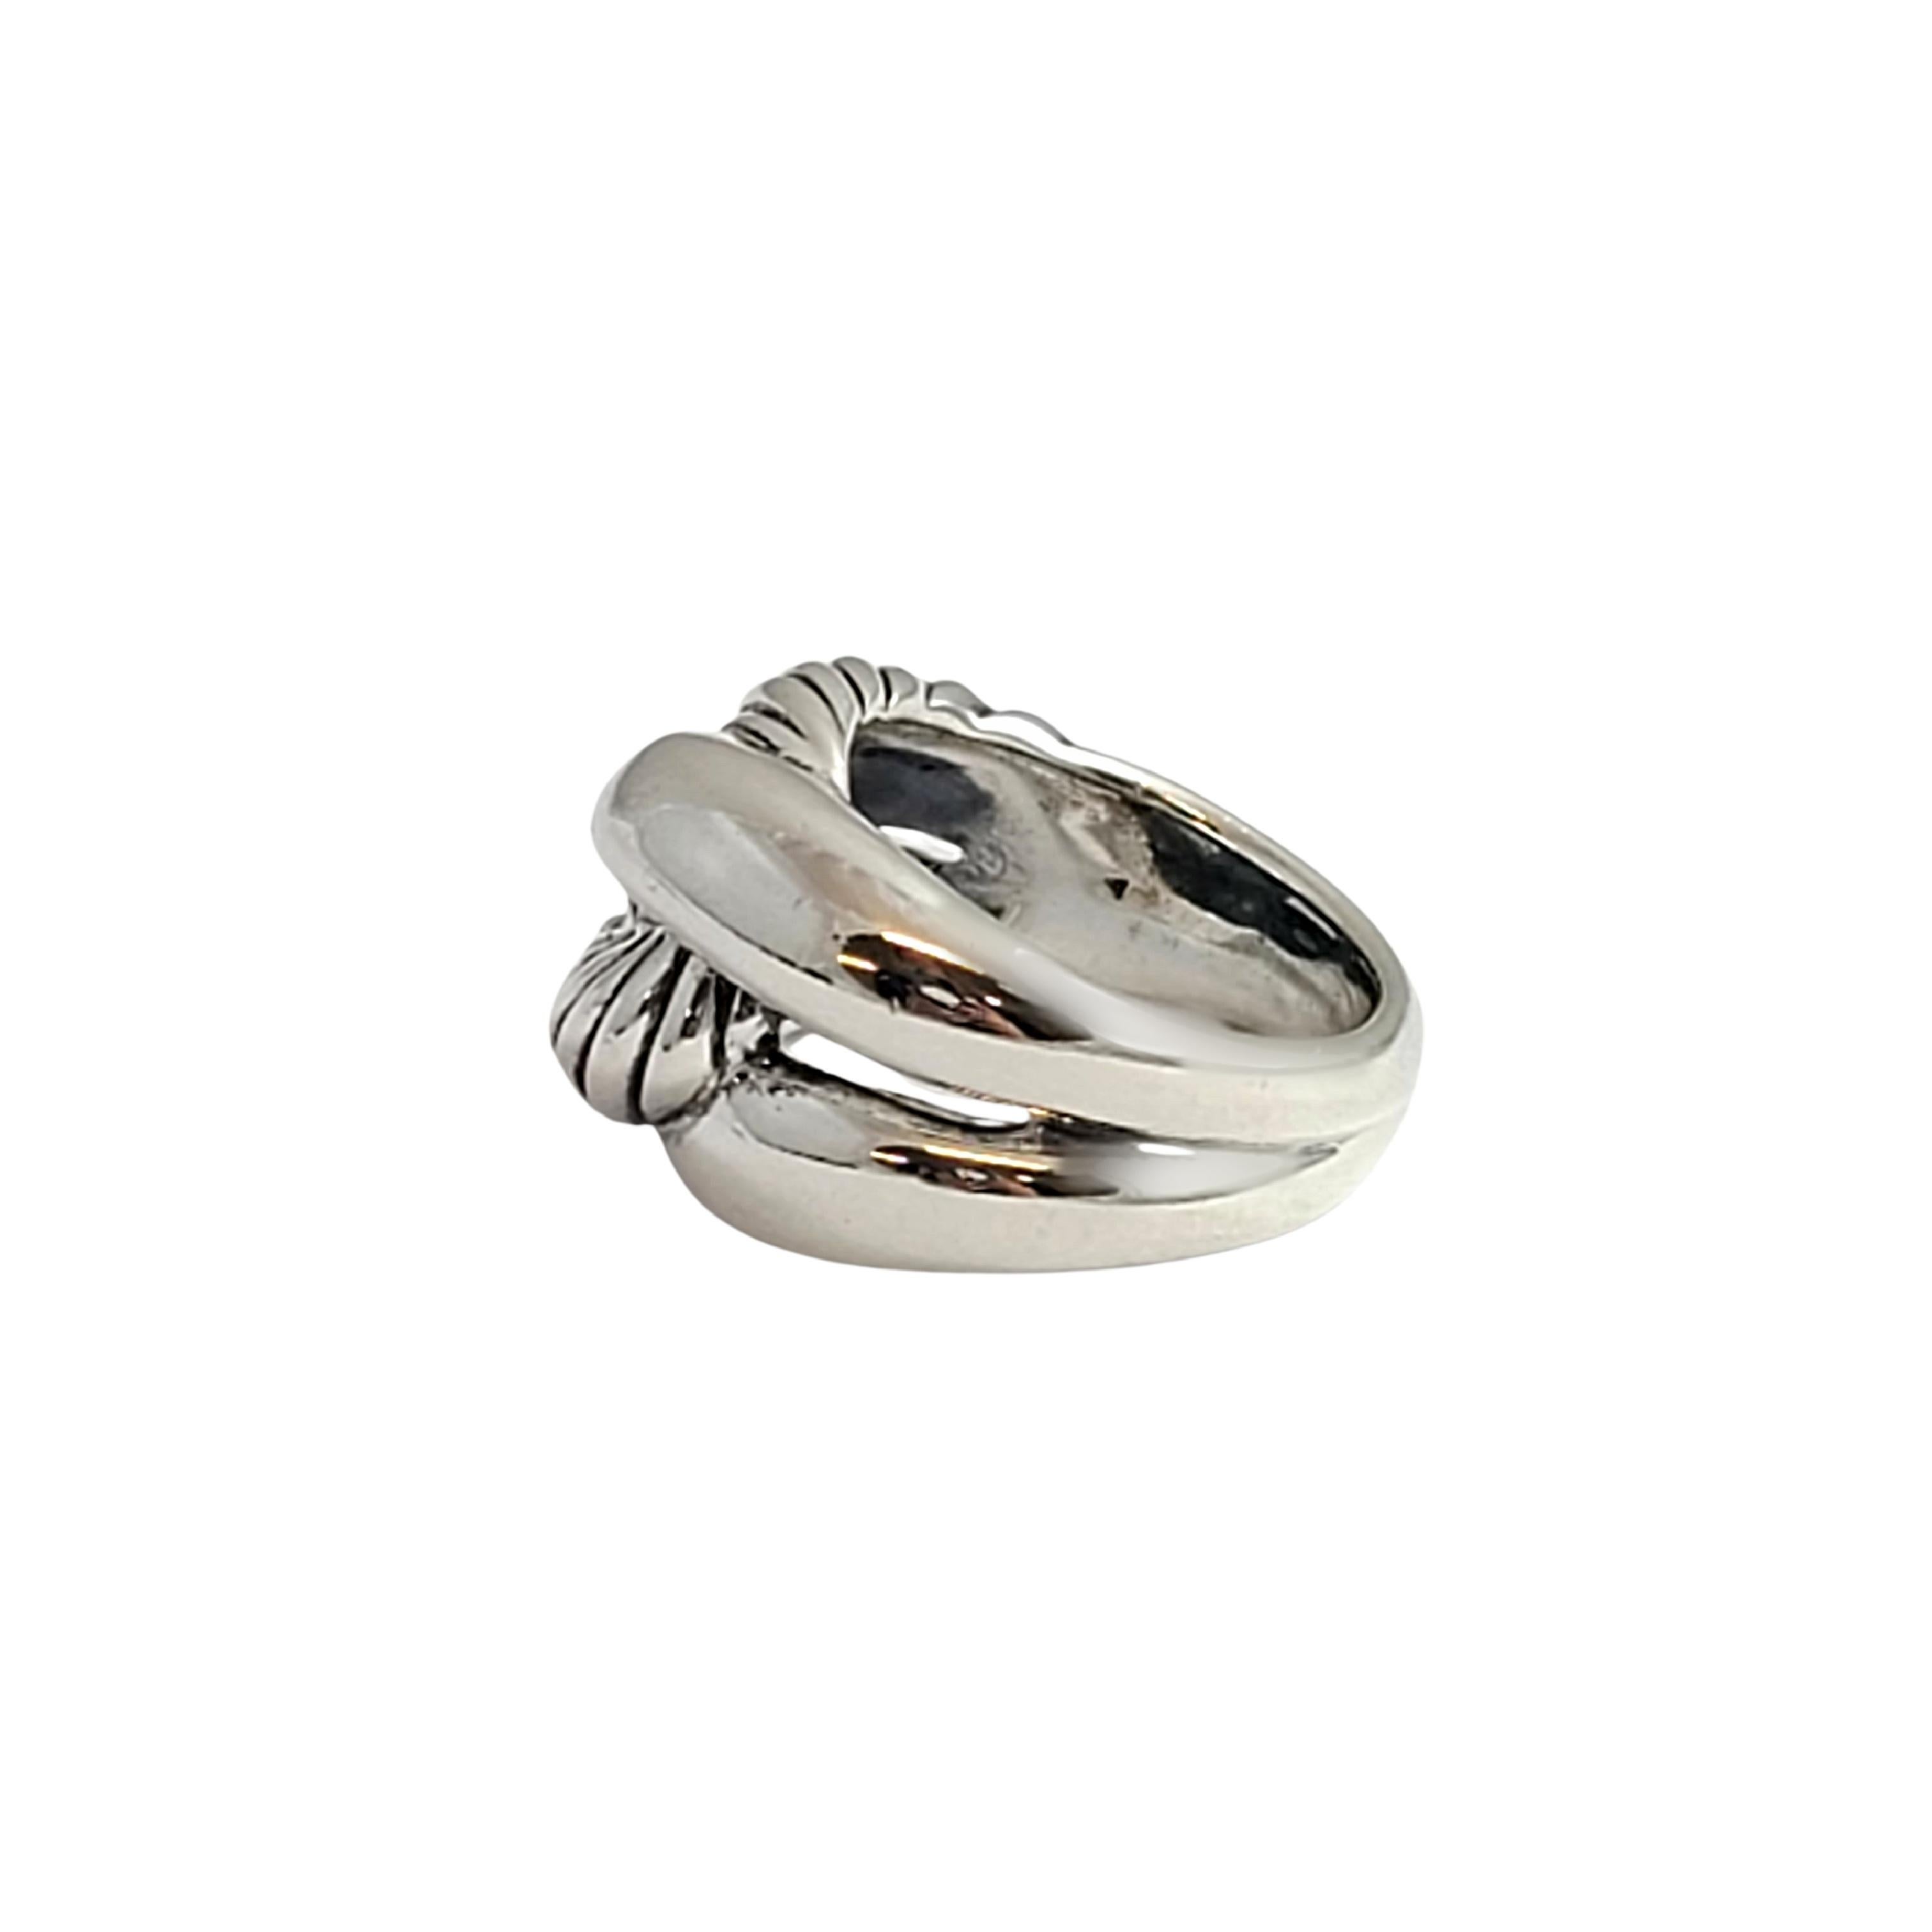 Sterling silver Cable Infinity Knot ring by David Yurman

Size 7.5

This beautiful sterling silver band is by David Yurman, it features intertwined loops of smooth polished and cable designs.

Measures approx 5/8